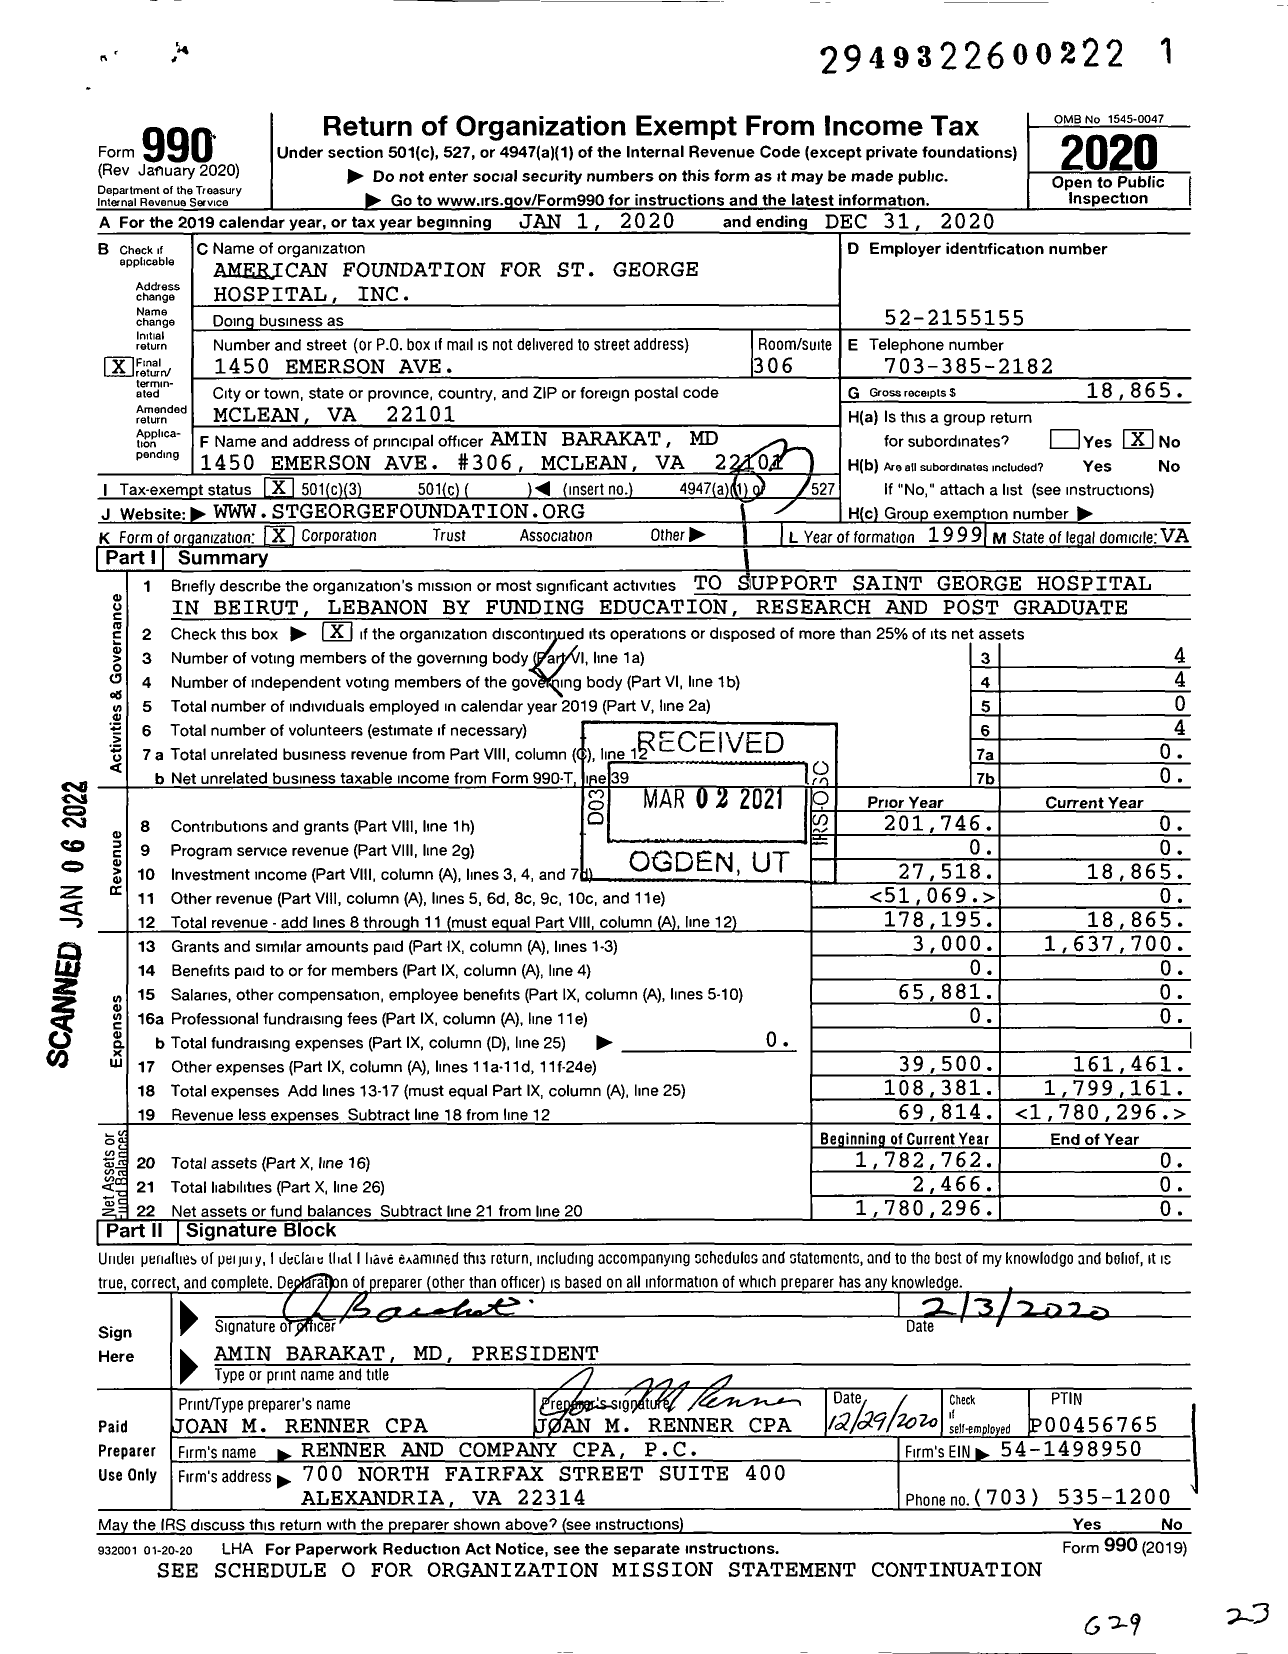 Image of first page of 2020 Form 990 for American Foundation for St George Hospital